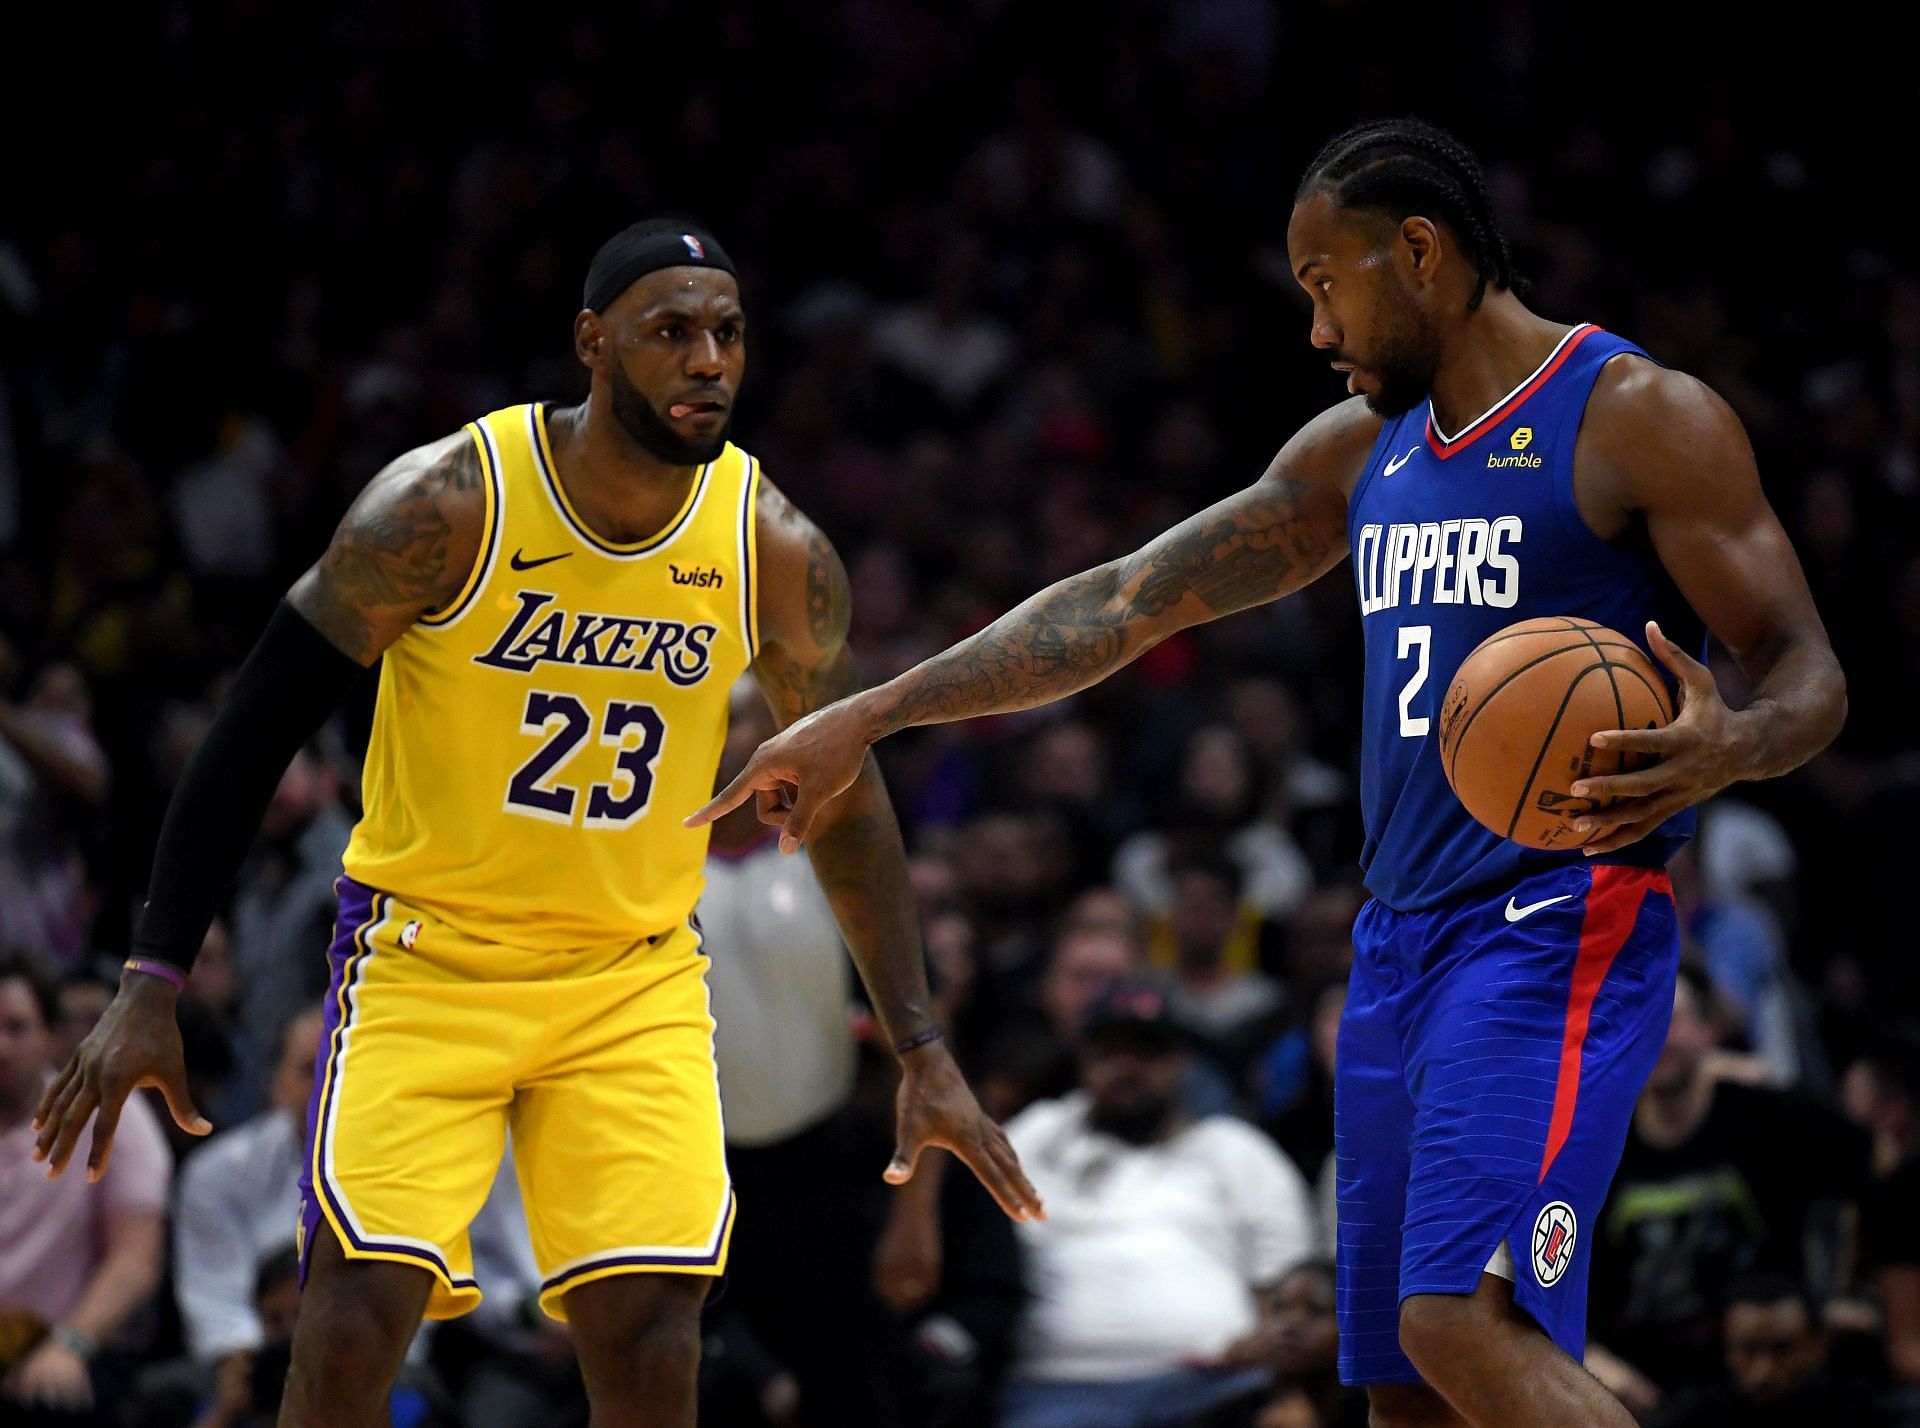 Kawhi Leonard of the LA Clippers against LeBron James of the LA Lakers in 2019